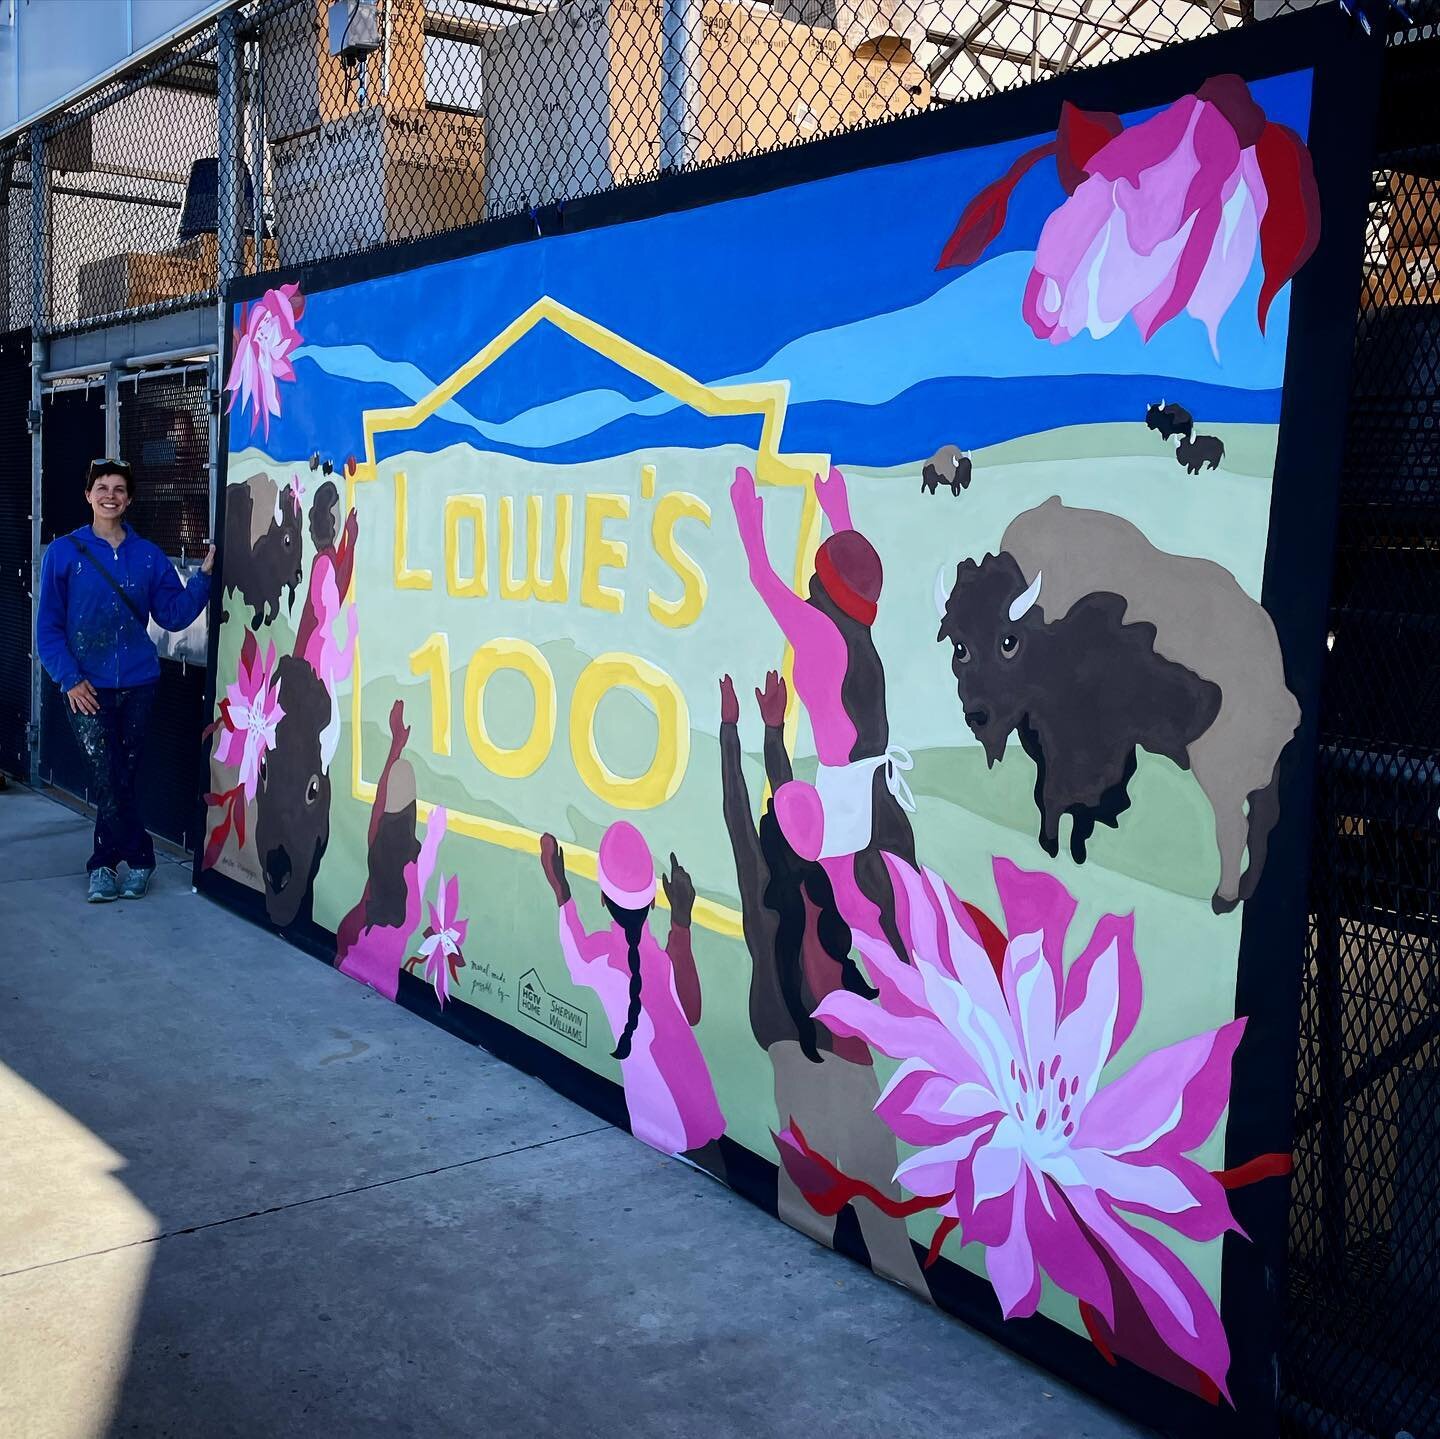 Found my mural out front of Lowe&rsquo;s! 📸 Photo by Dawn, friendly Garden Center employee 🎨
.
.
.
#lowes100murals #missoulalowes #lowesmissoula #lowes #muralart #mural #muralist #ladymuralist #montanaart #montanapainter